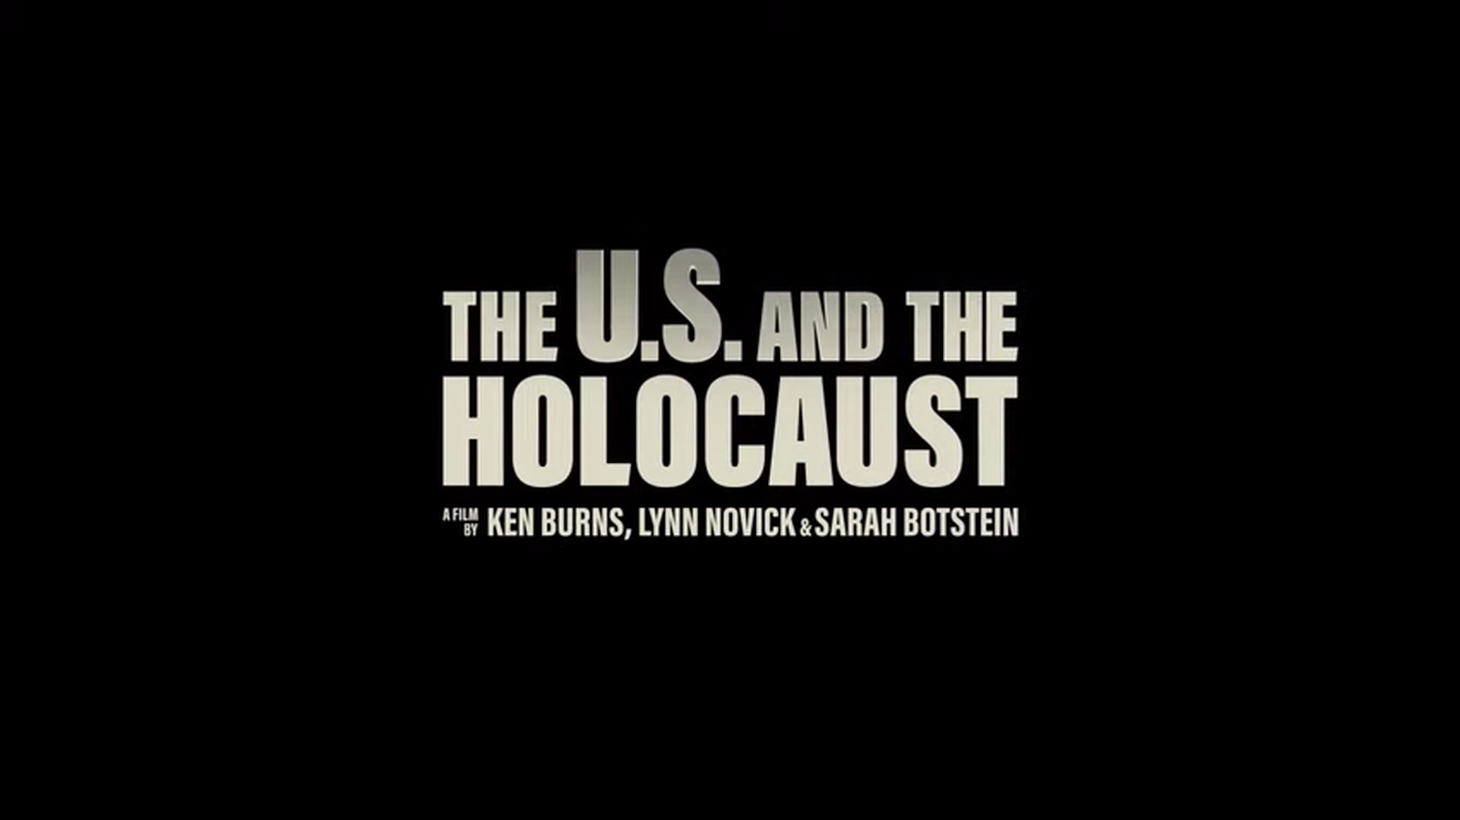 America’s culpability in the Holocaust is the subject of a new documentary series called “The U.S. and the Holocaust.”